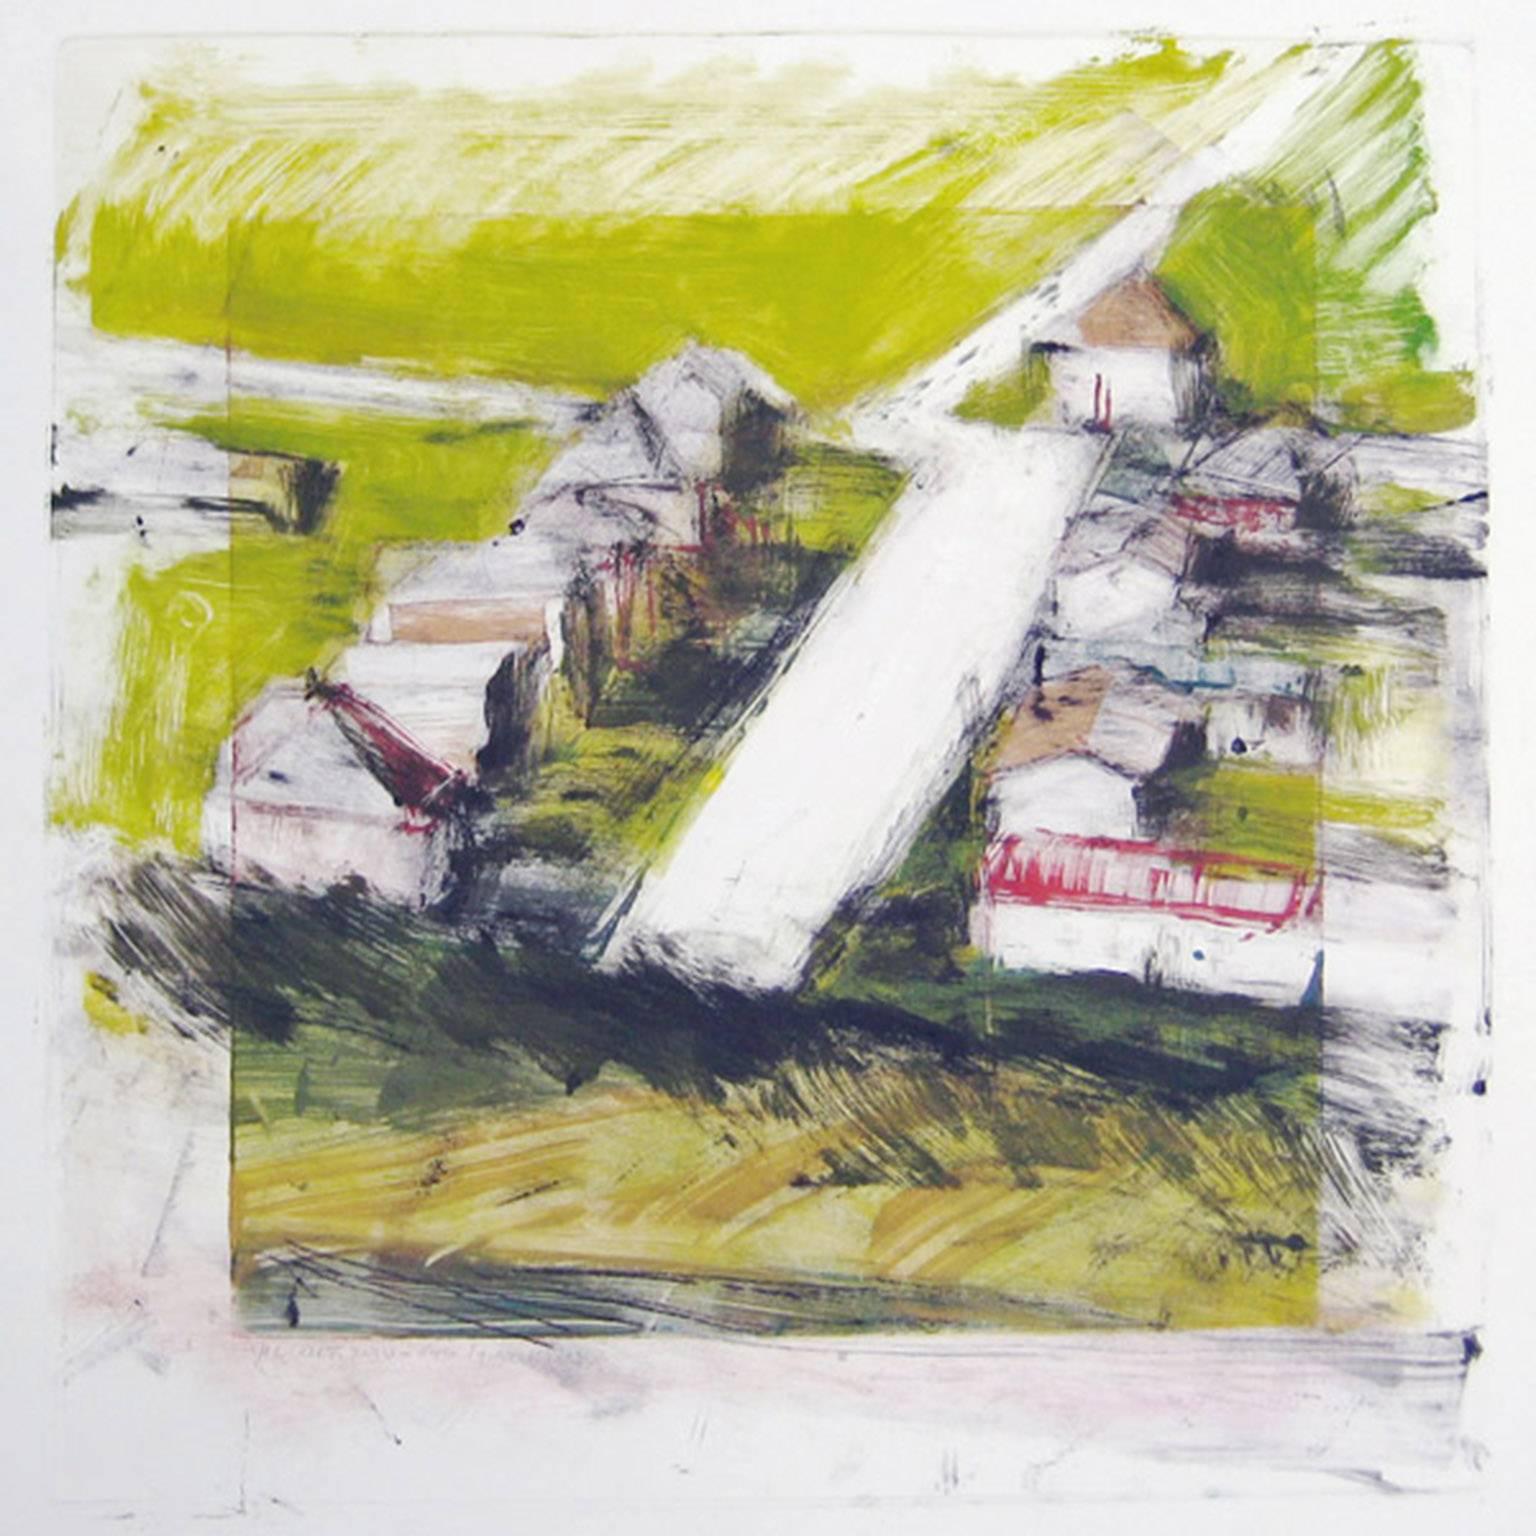 Green Square Suburbia - Print by Helen Cantrell